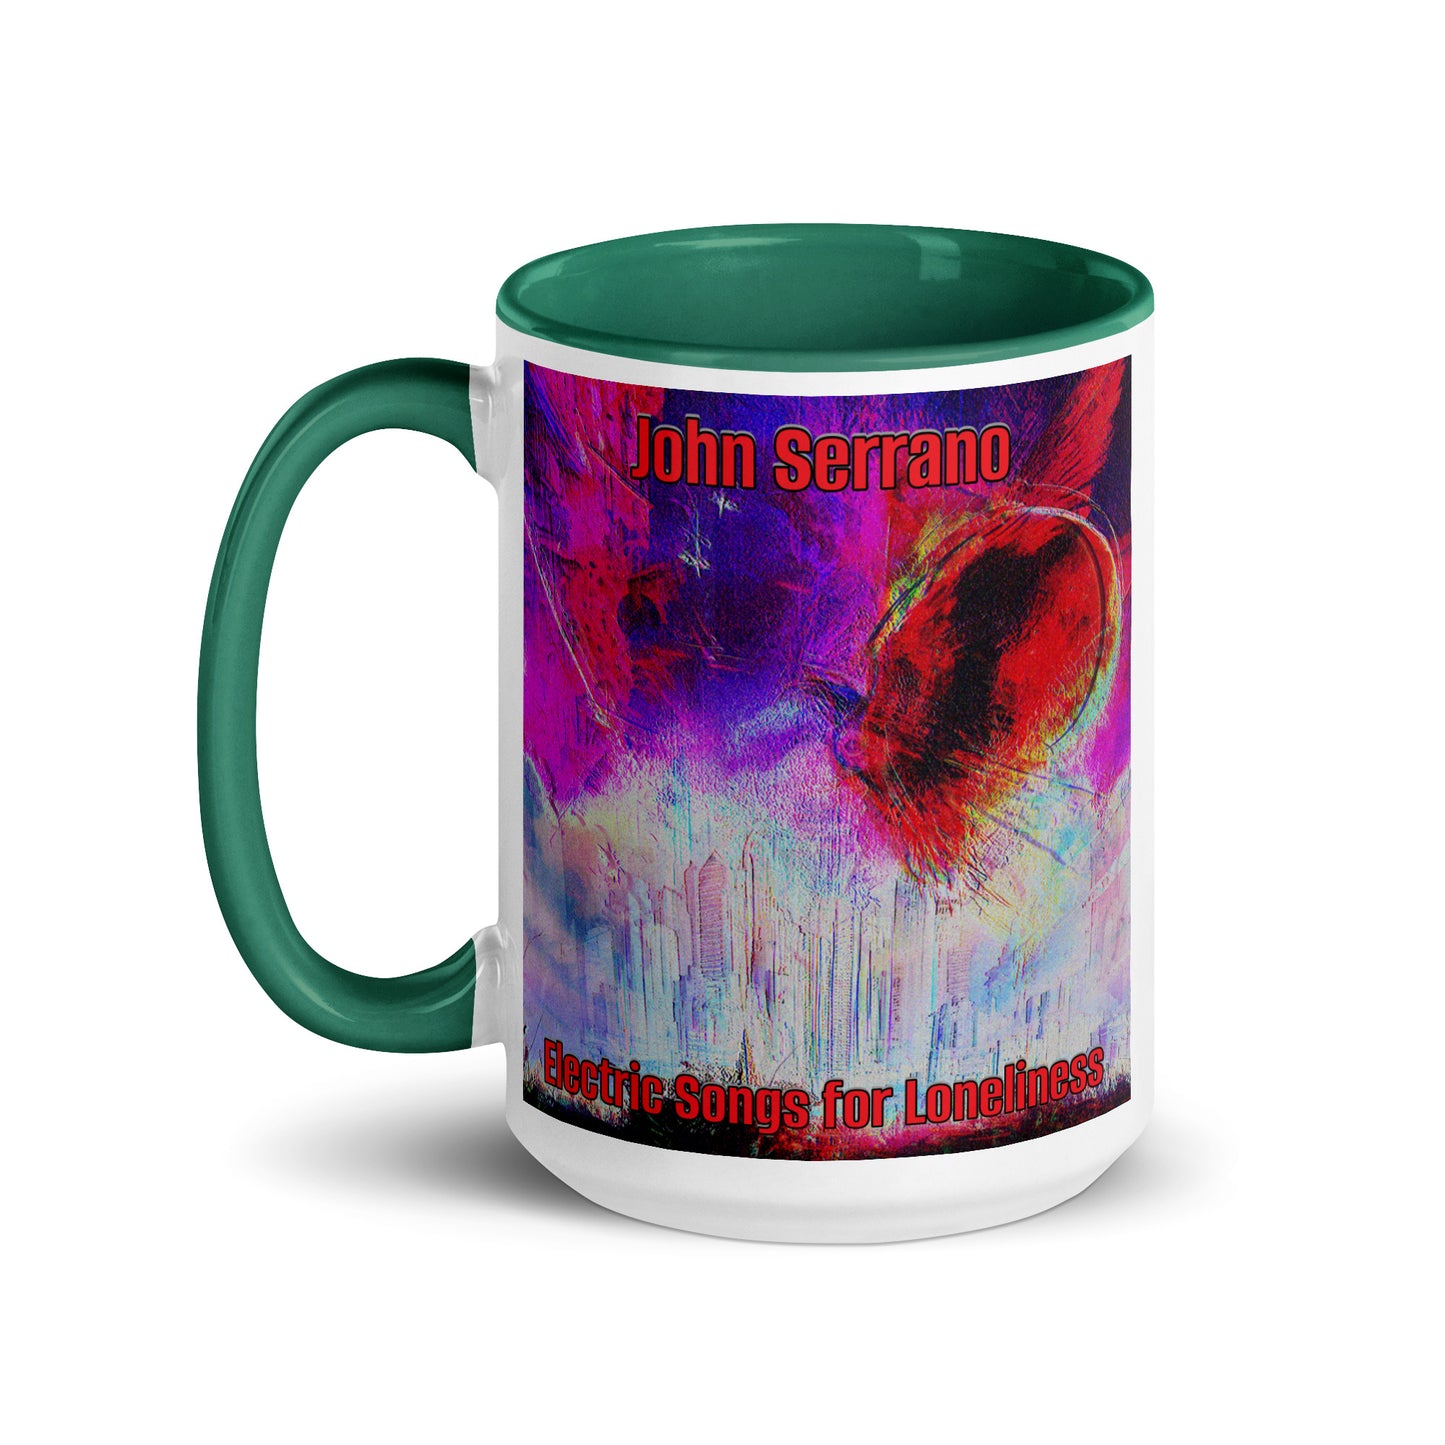 John Serrano - Electric Songs For Loneliness Mug With Color Inside